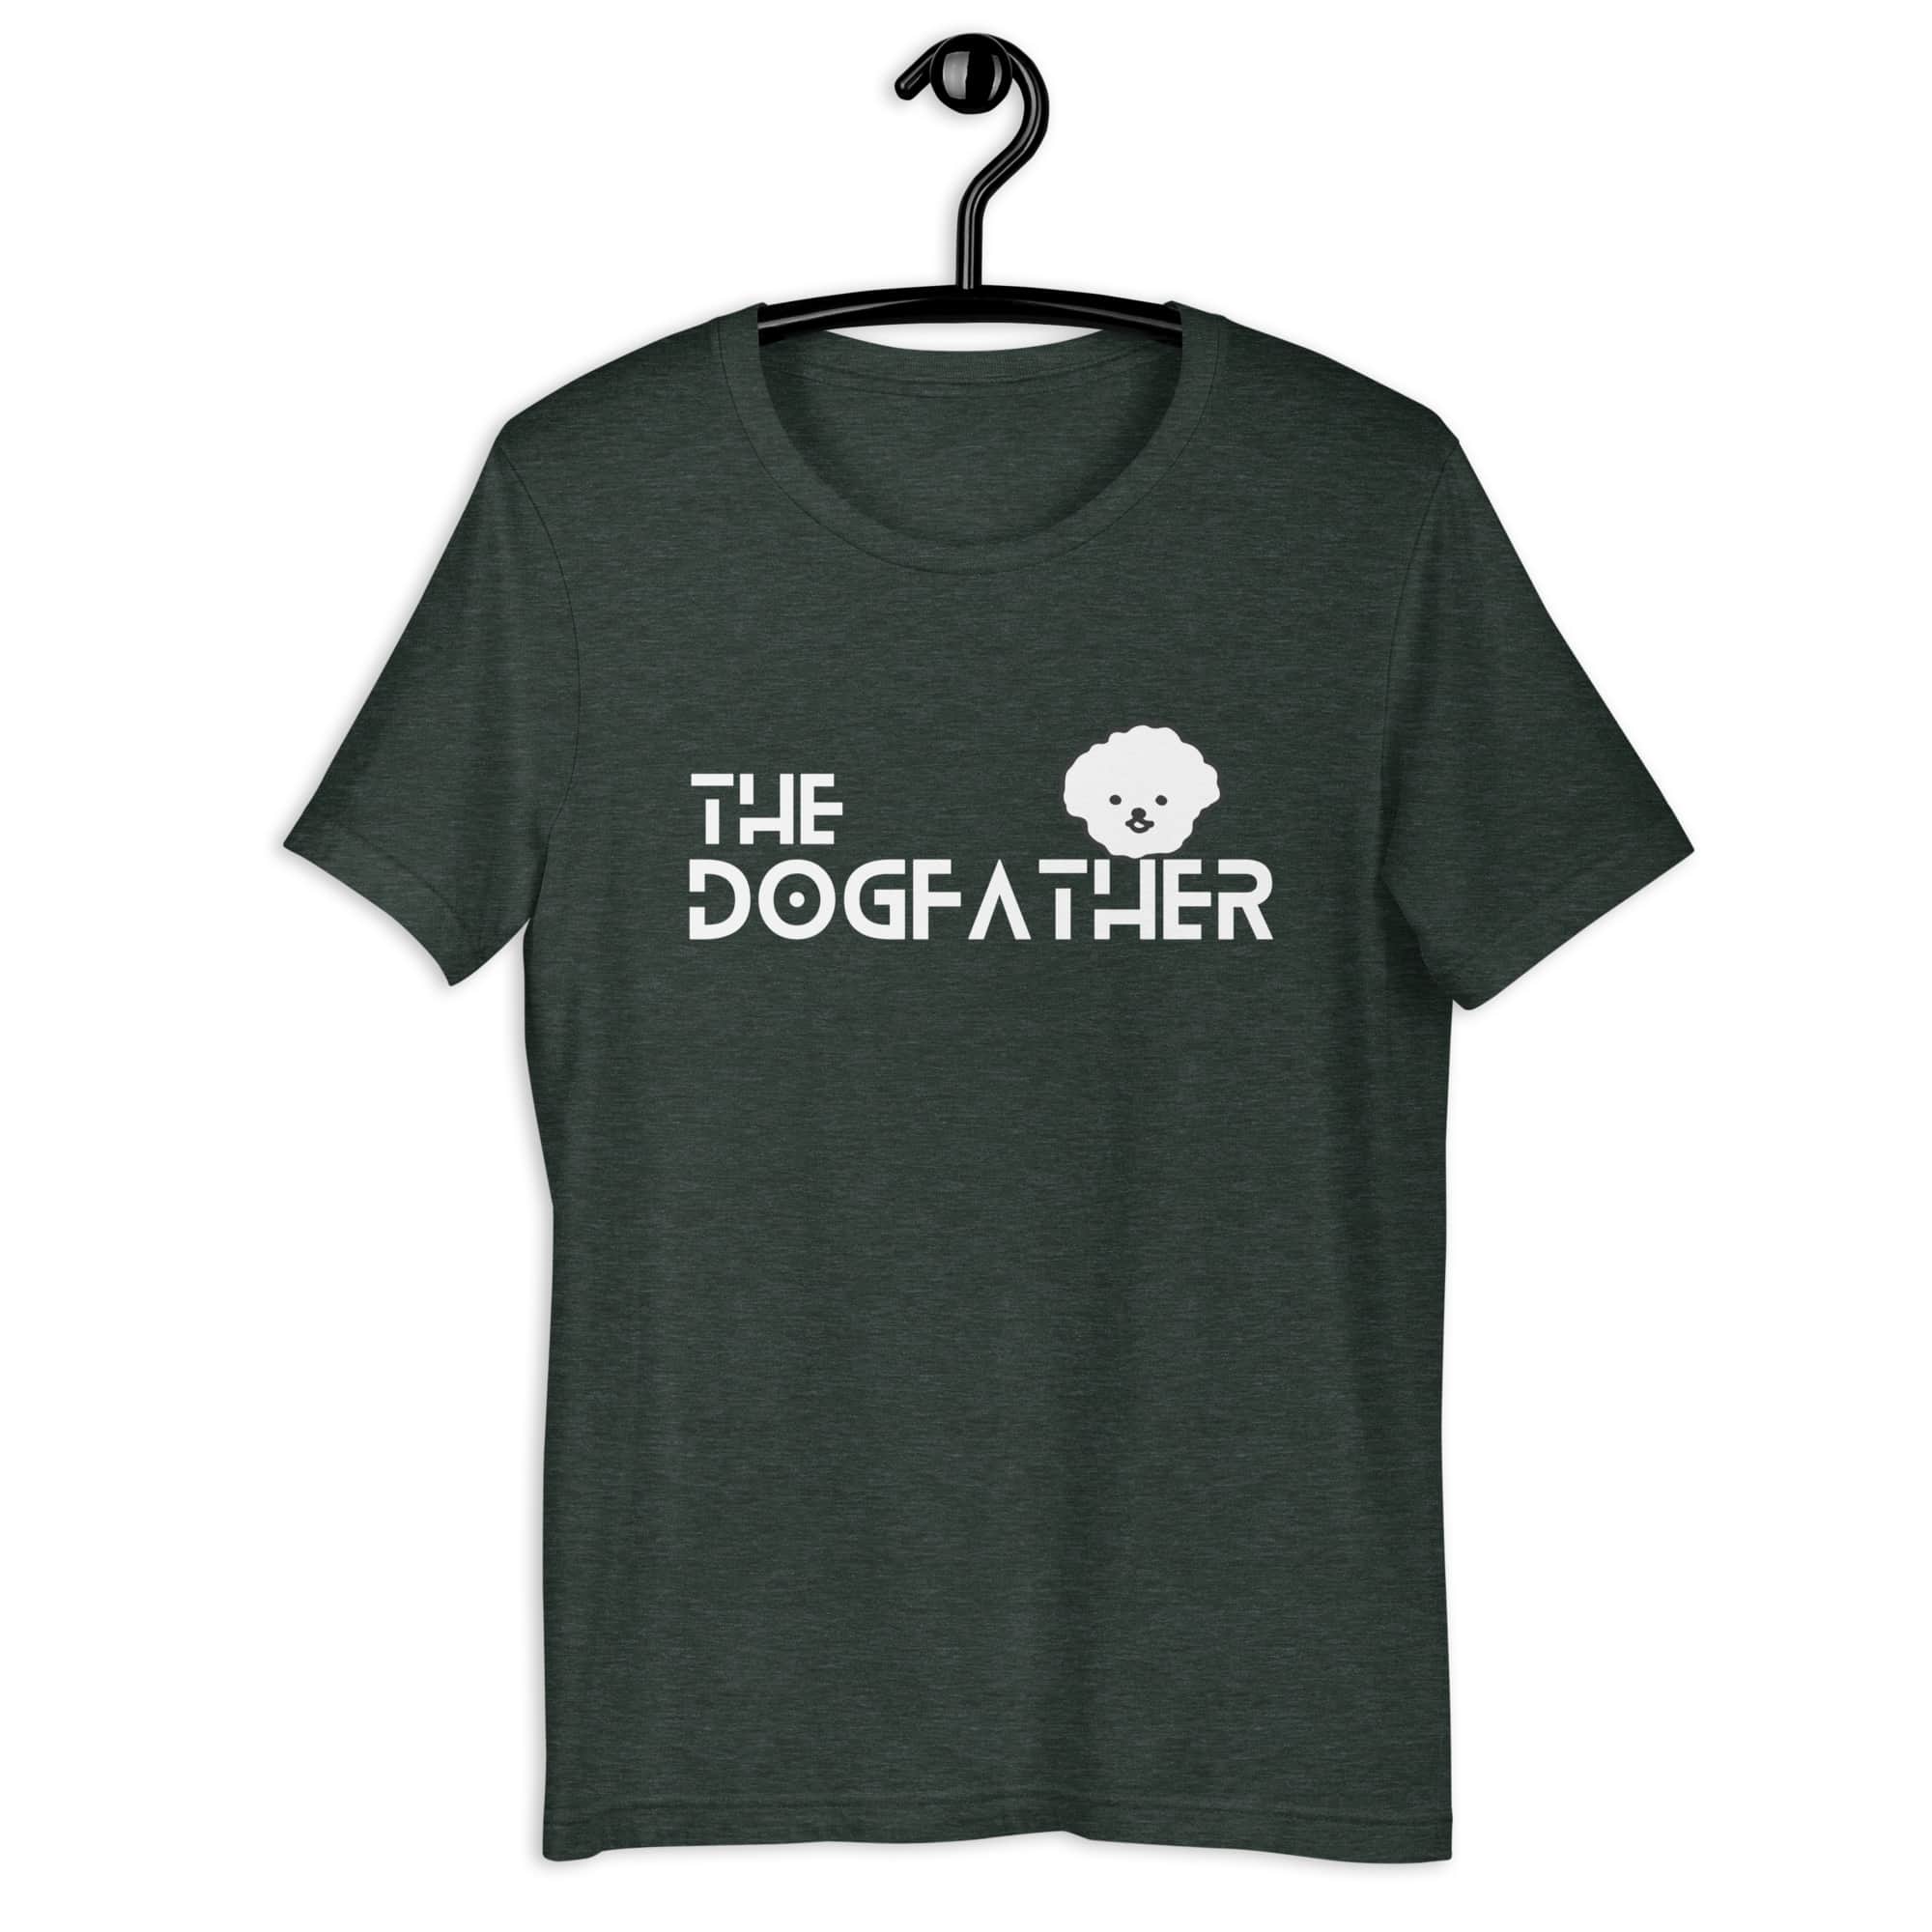 The Dogfather Poodles Unisex T-Shirt. Heather Forest